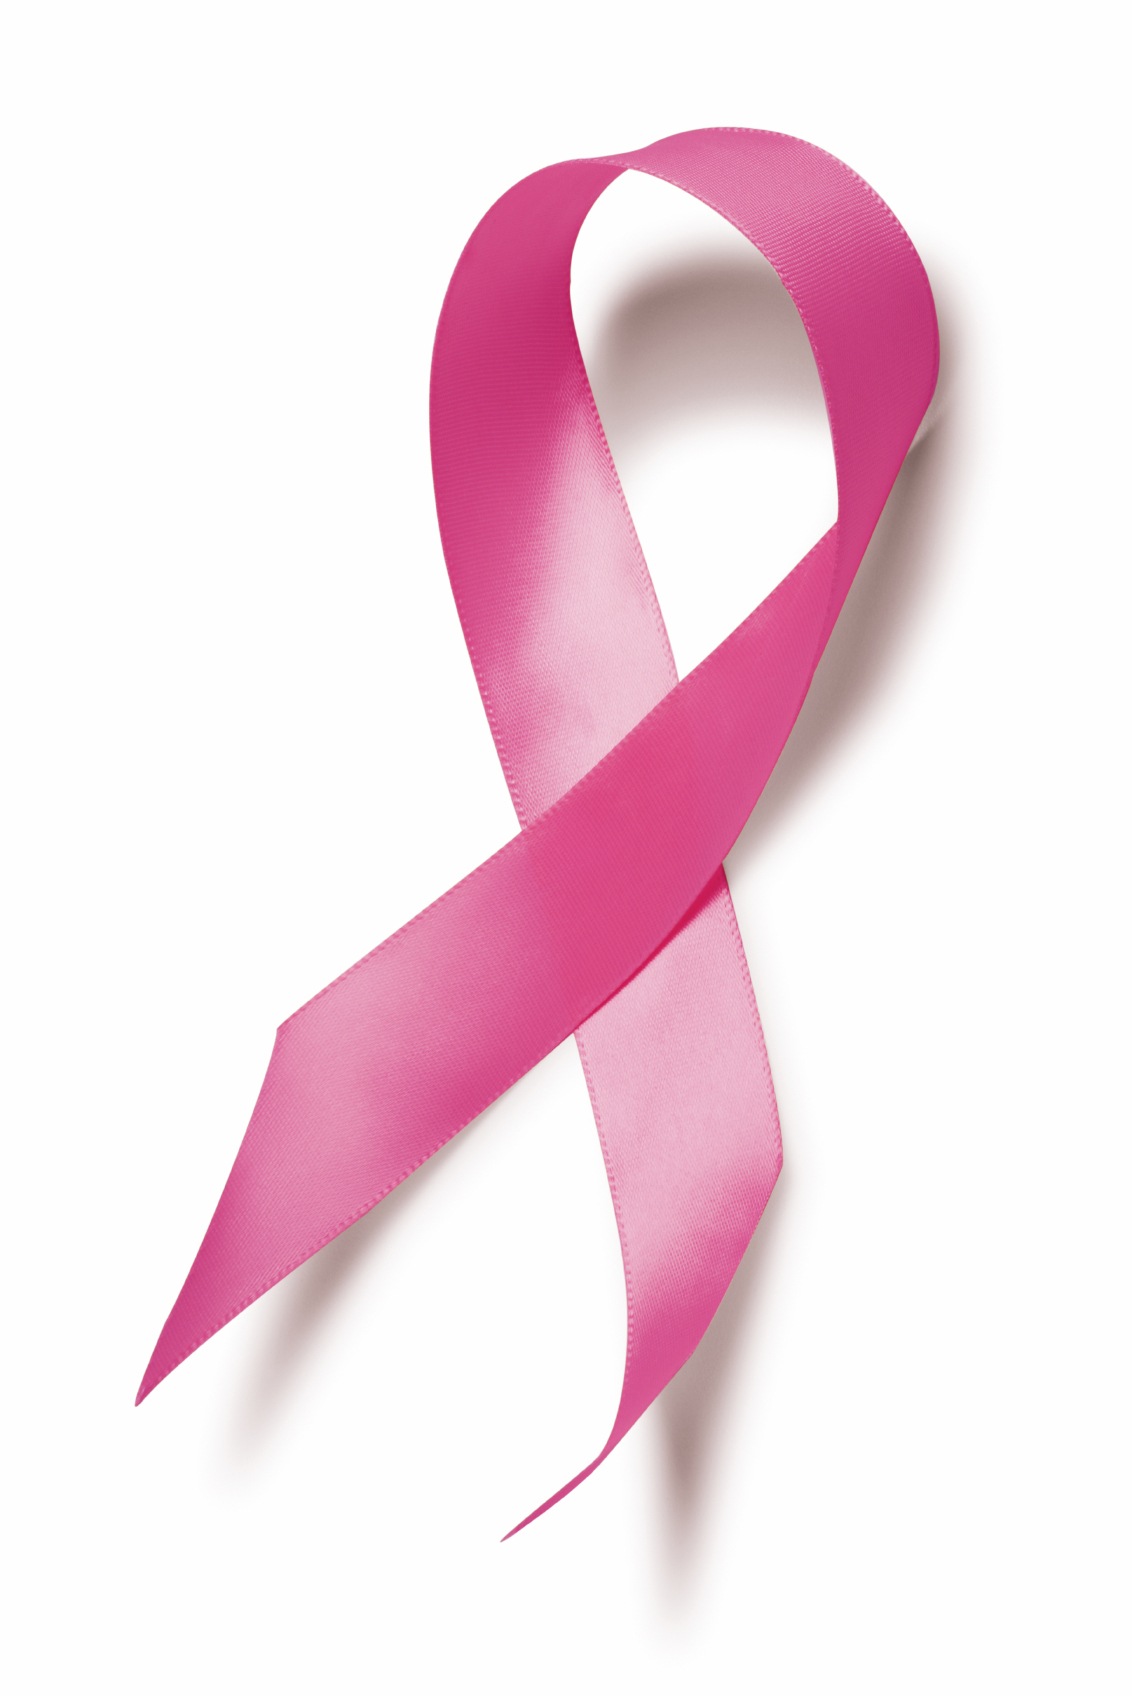 october-is-national-breast-cancer-awareness-month